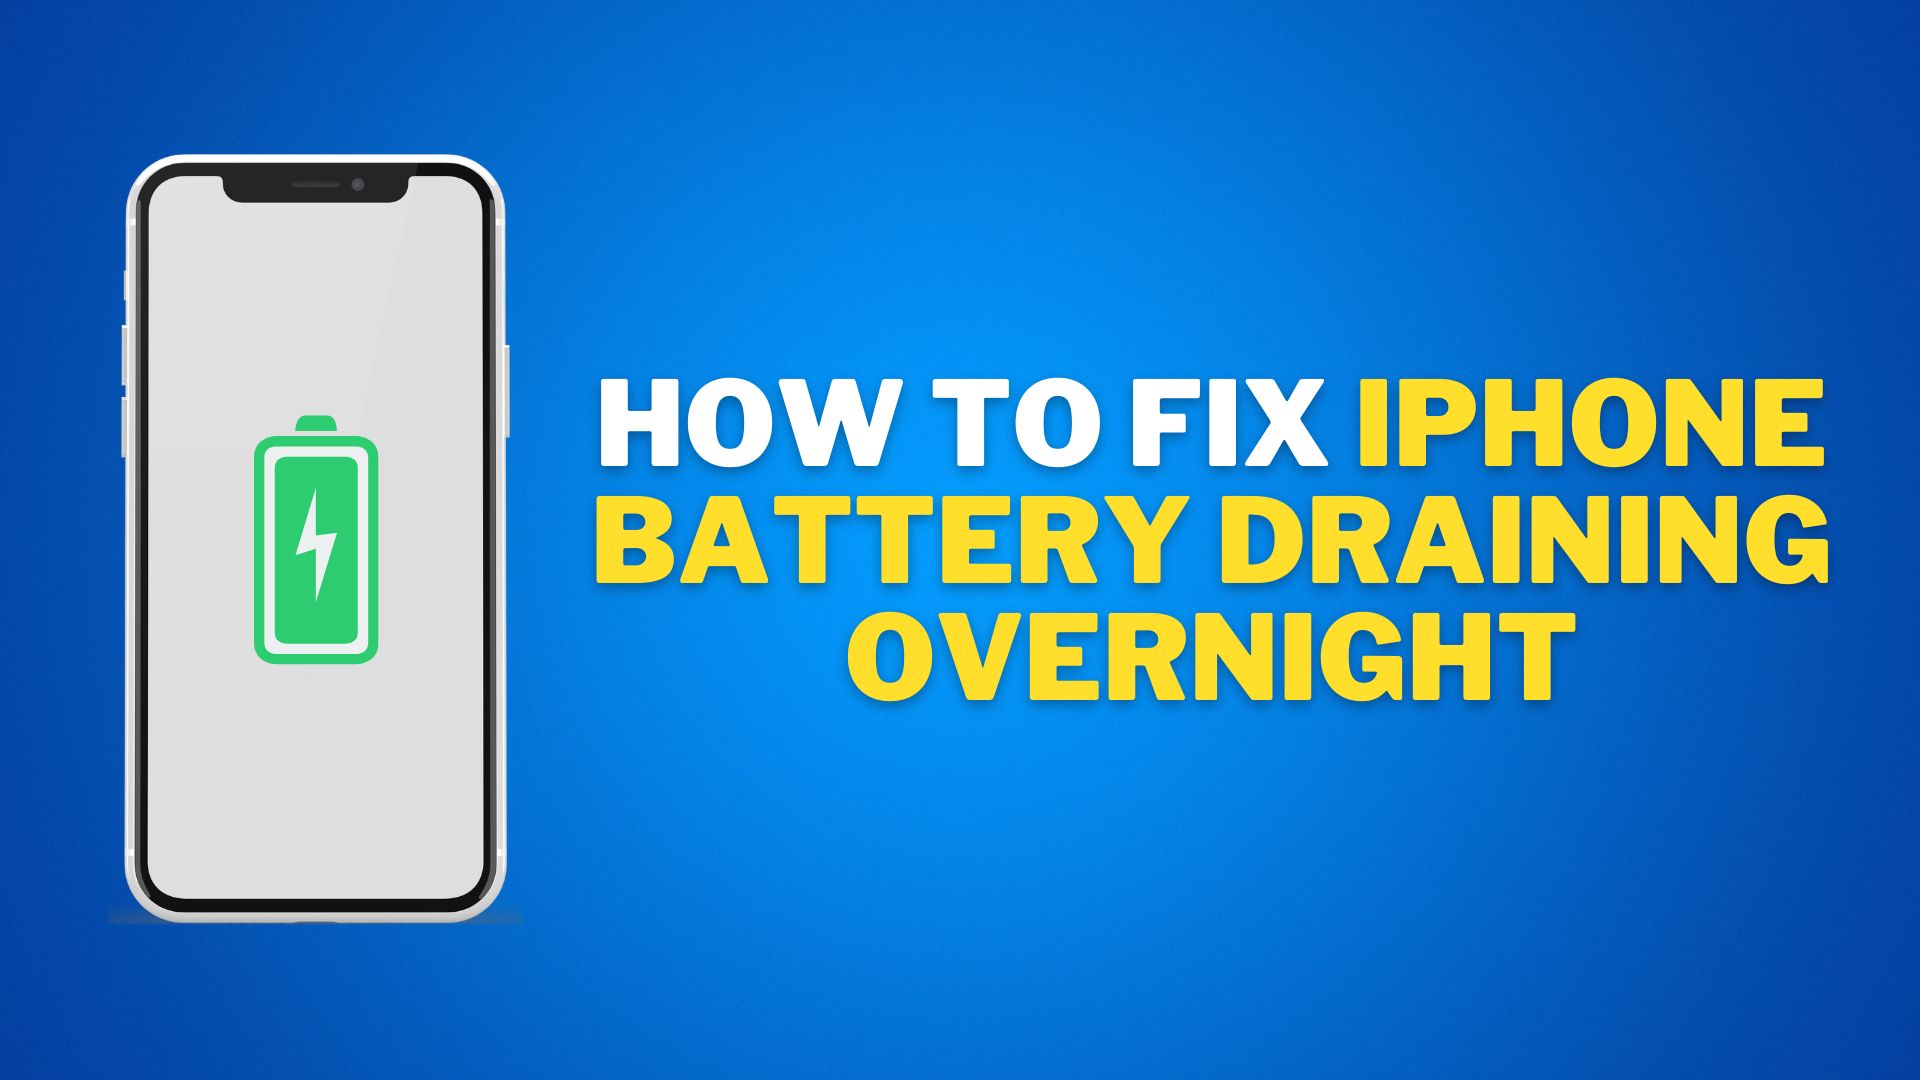 How to Fix iPhone Battery Draining Overnight